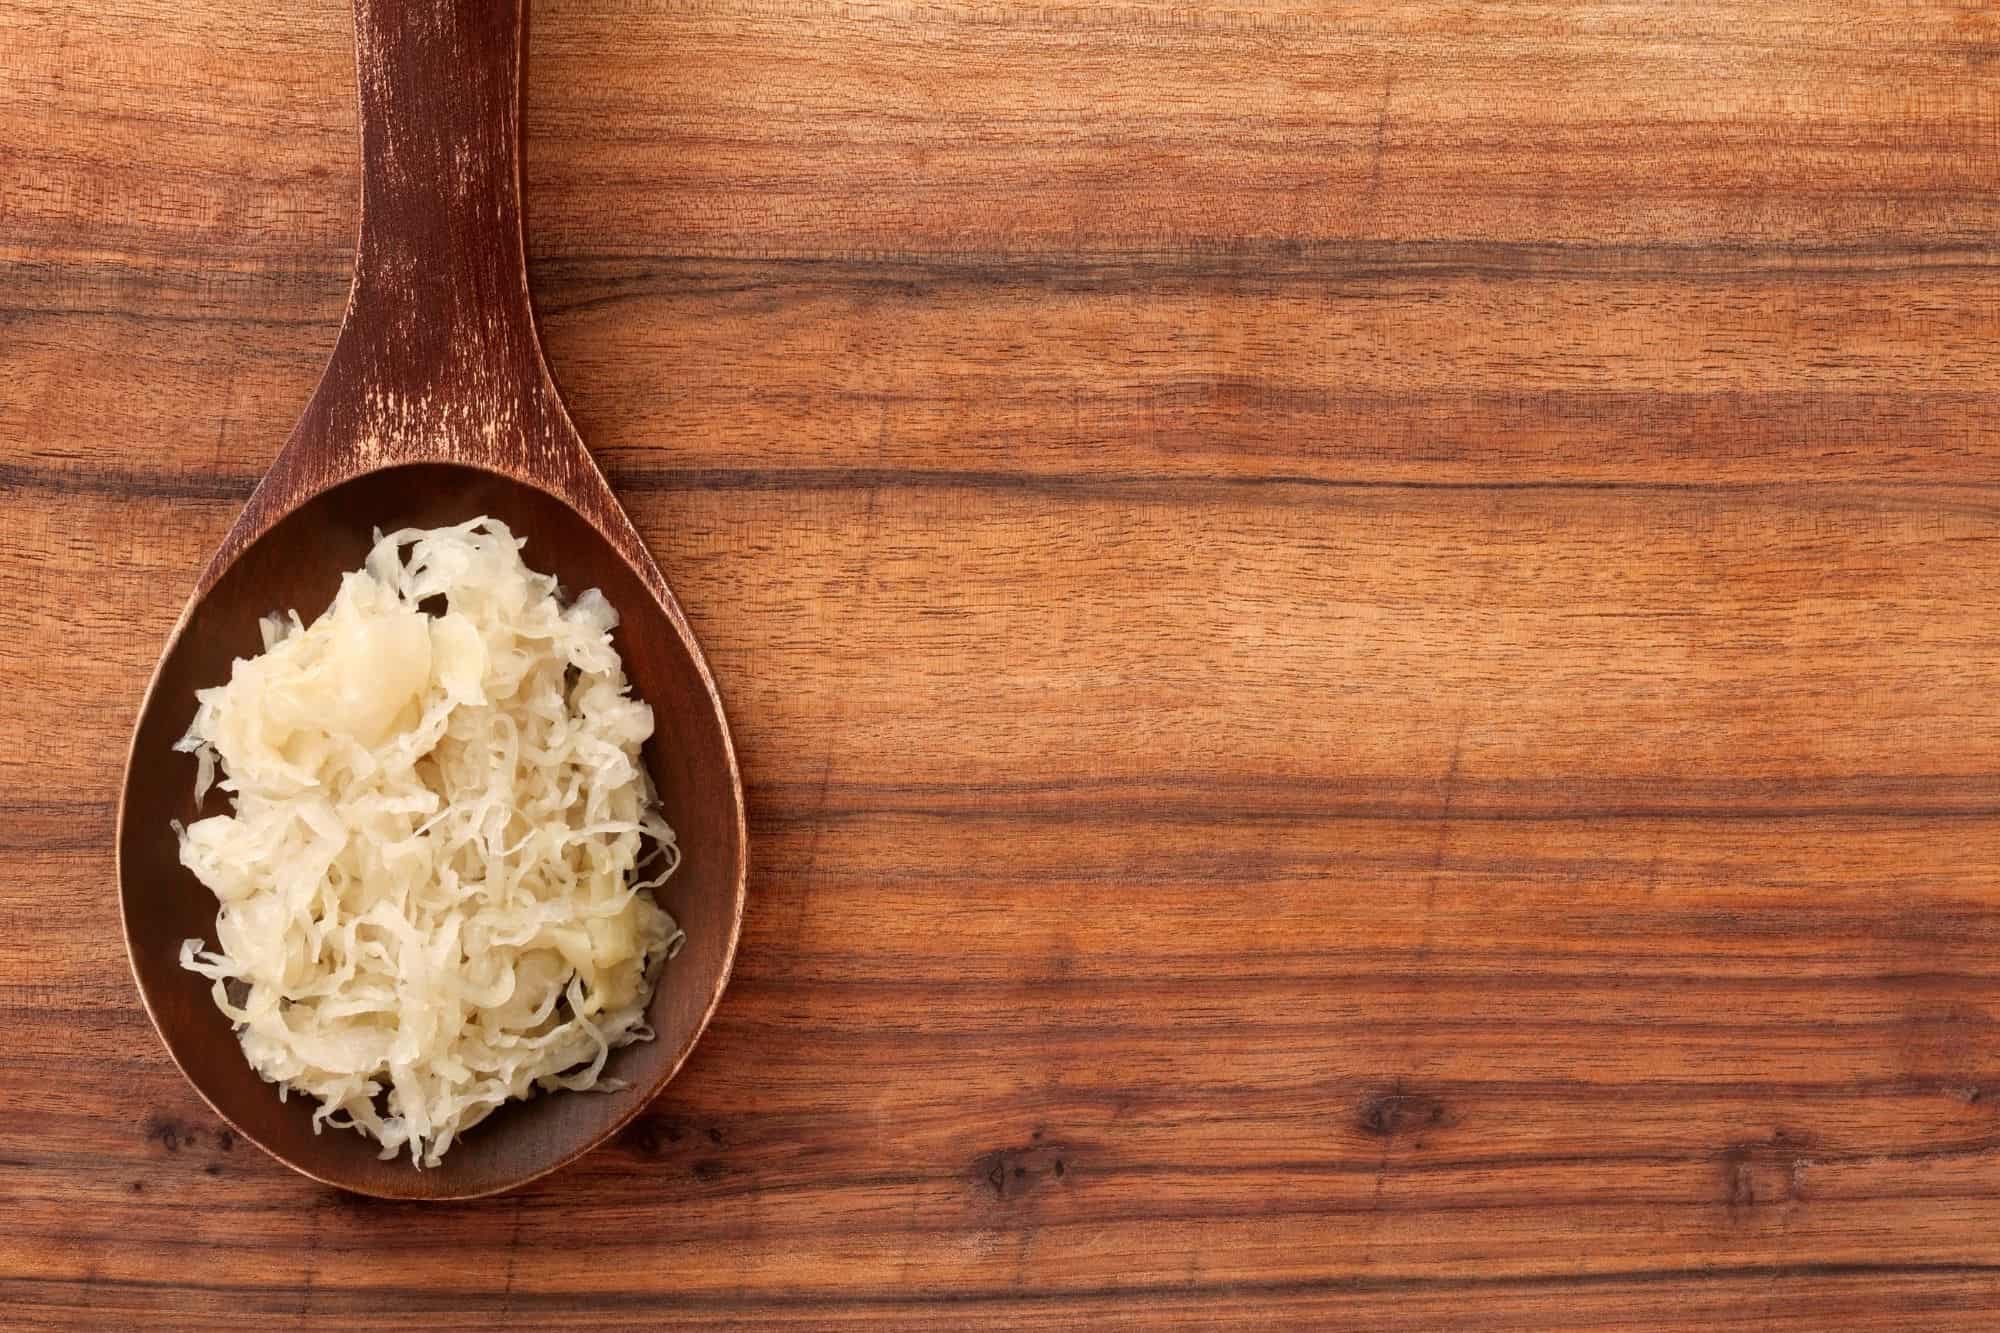 Sauerkraut on a wooden spoon with a wooden backdrop.